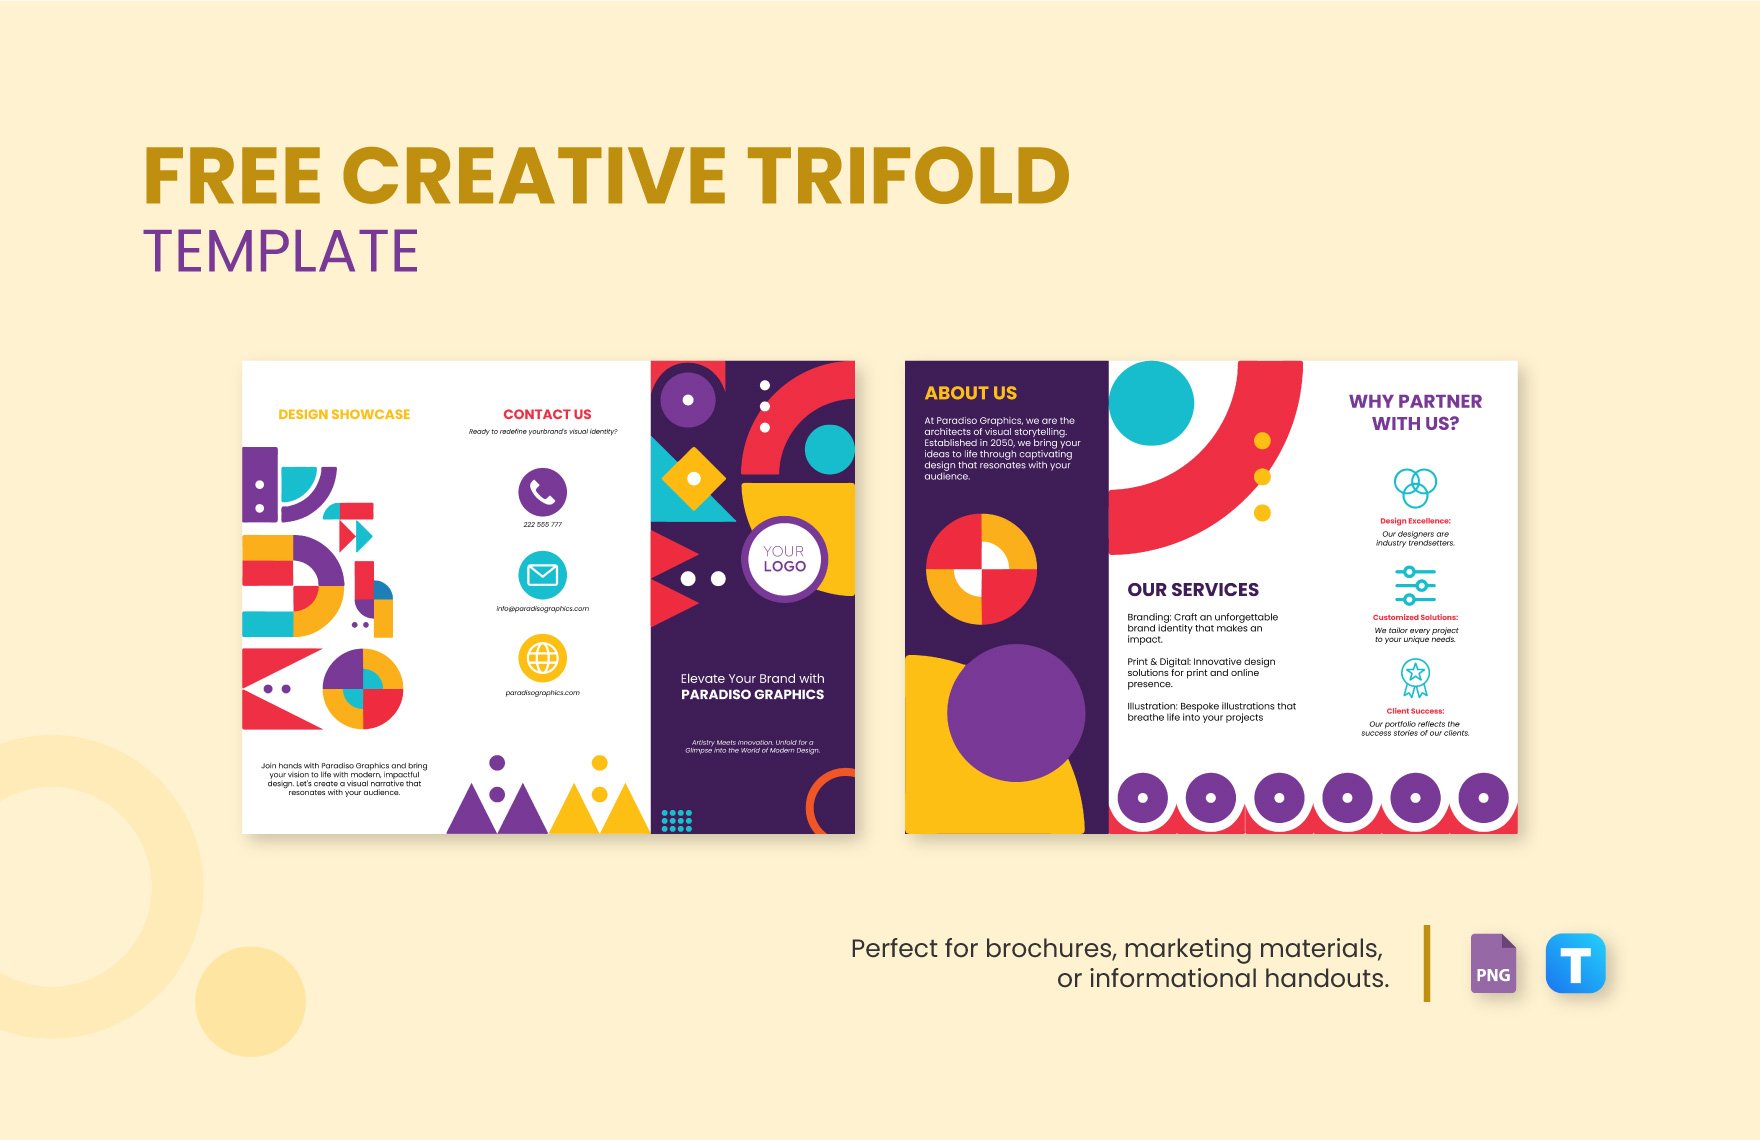 Free Creative Trifold Template